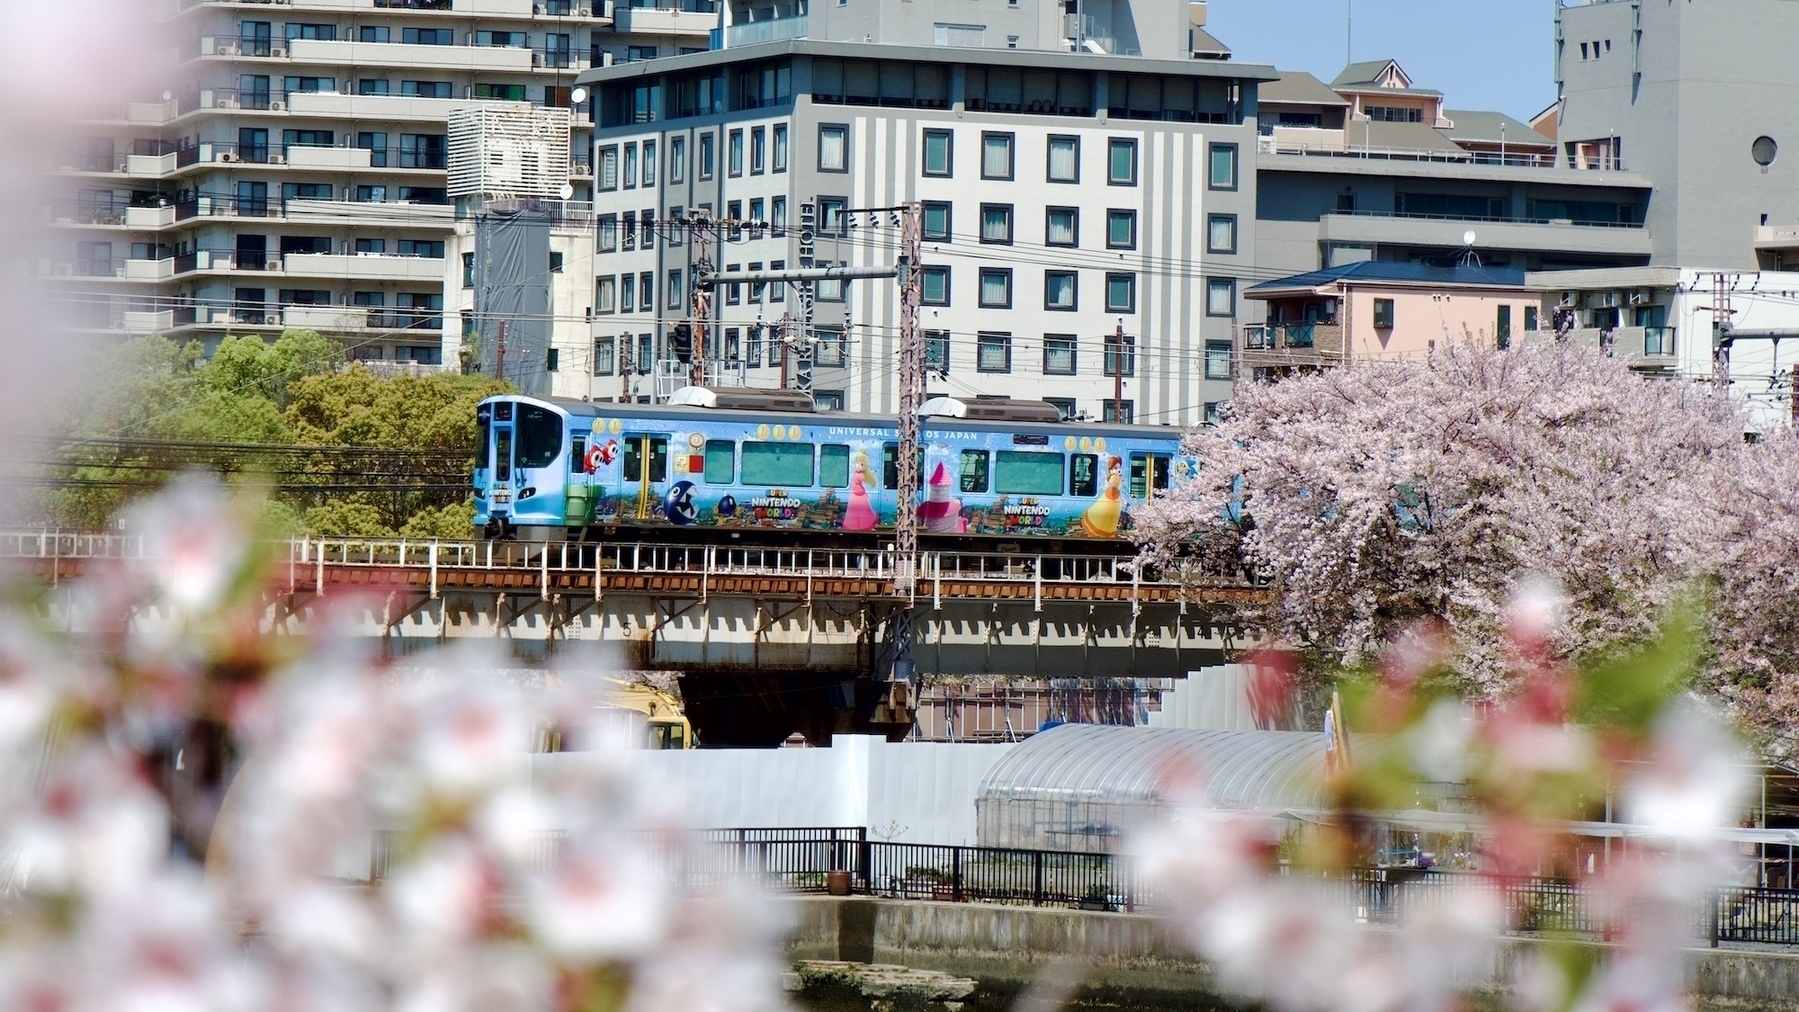 zoom photo through a sakura tree to a train crossing a bridge. Next to the bridge is another sakura tree in full bloom. The train is wrapped with a Super Mario World design for Universal Studies Japan, with depictions of the Princess, some Shy Guys, and more characters from the franchise